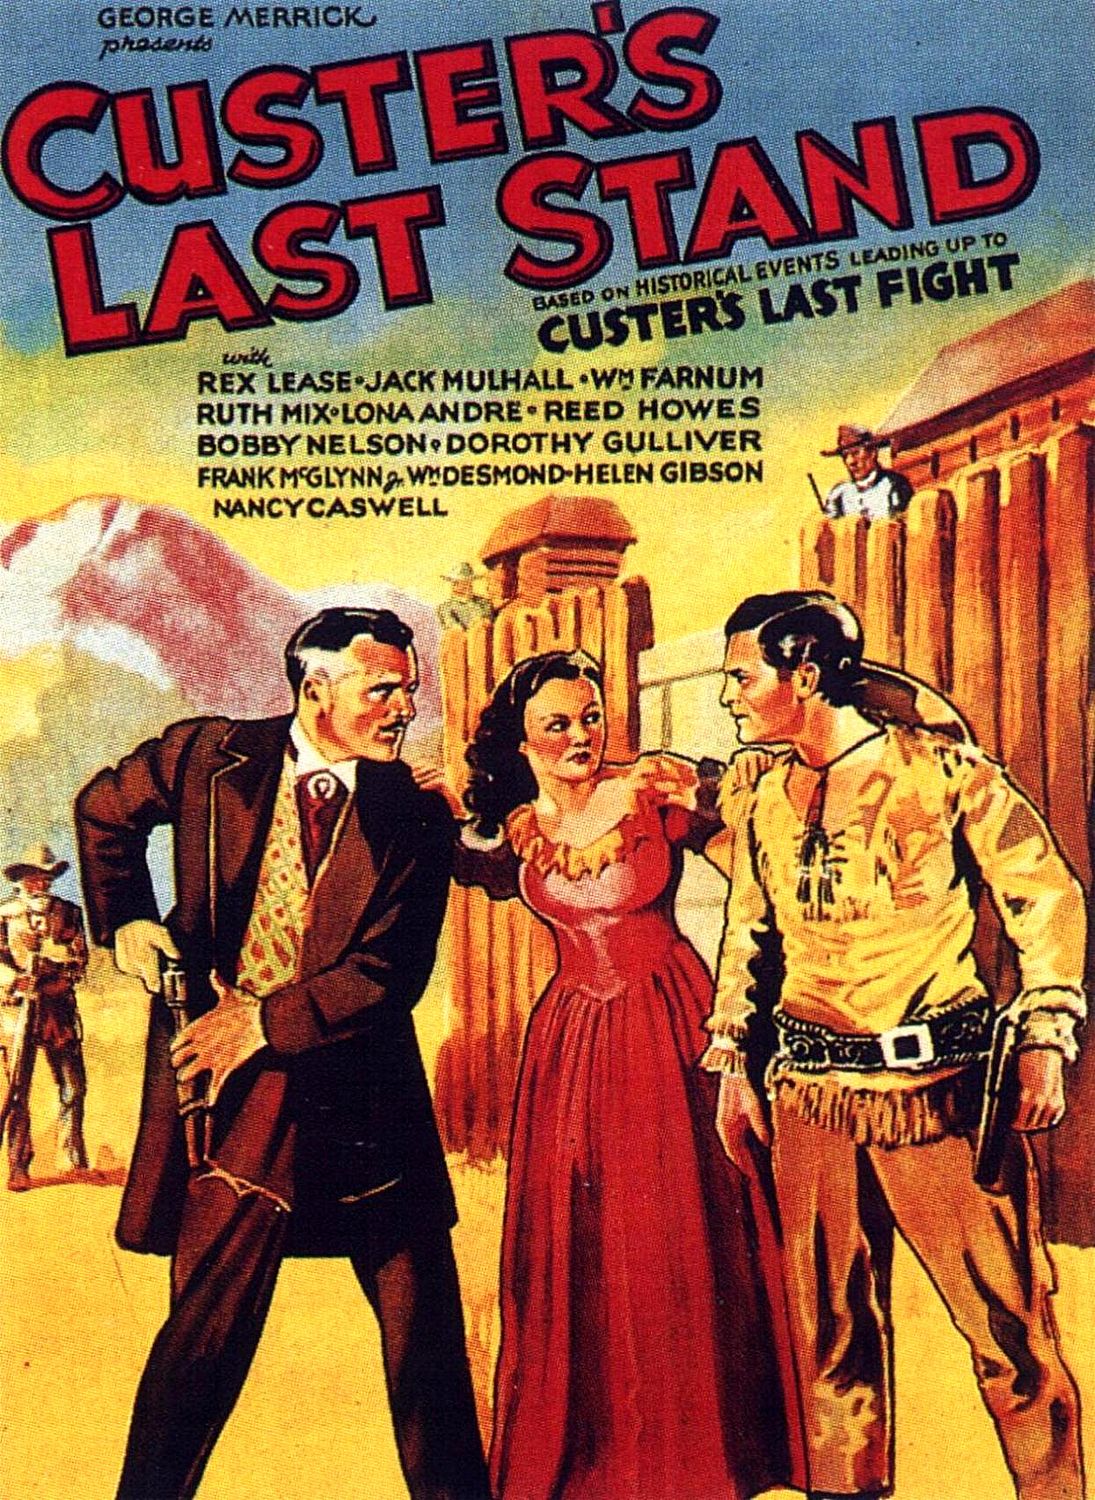 Extra Large Movie Poster Image for Custer's Last Stand 